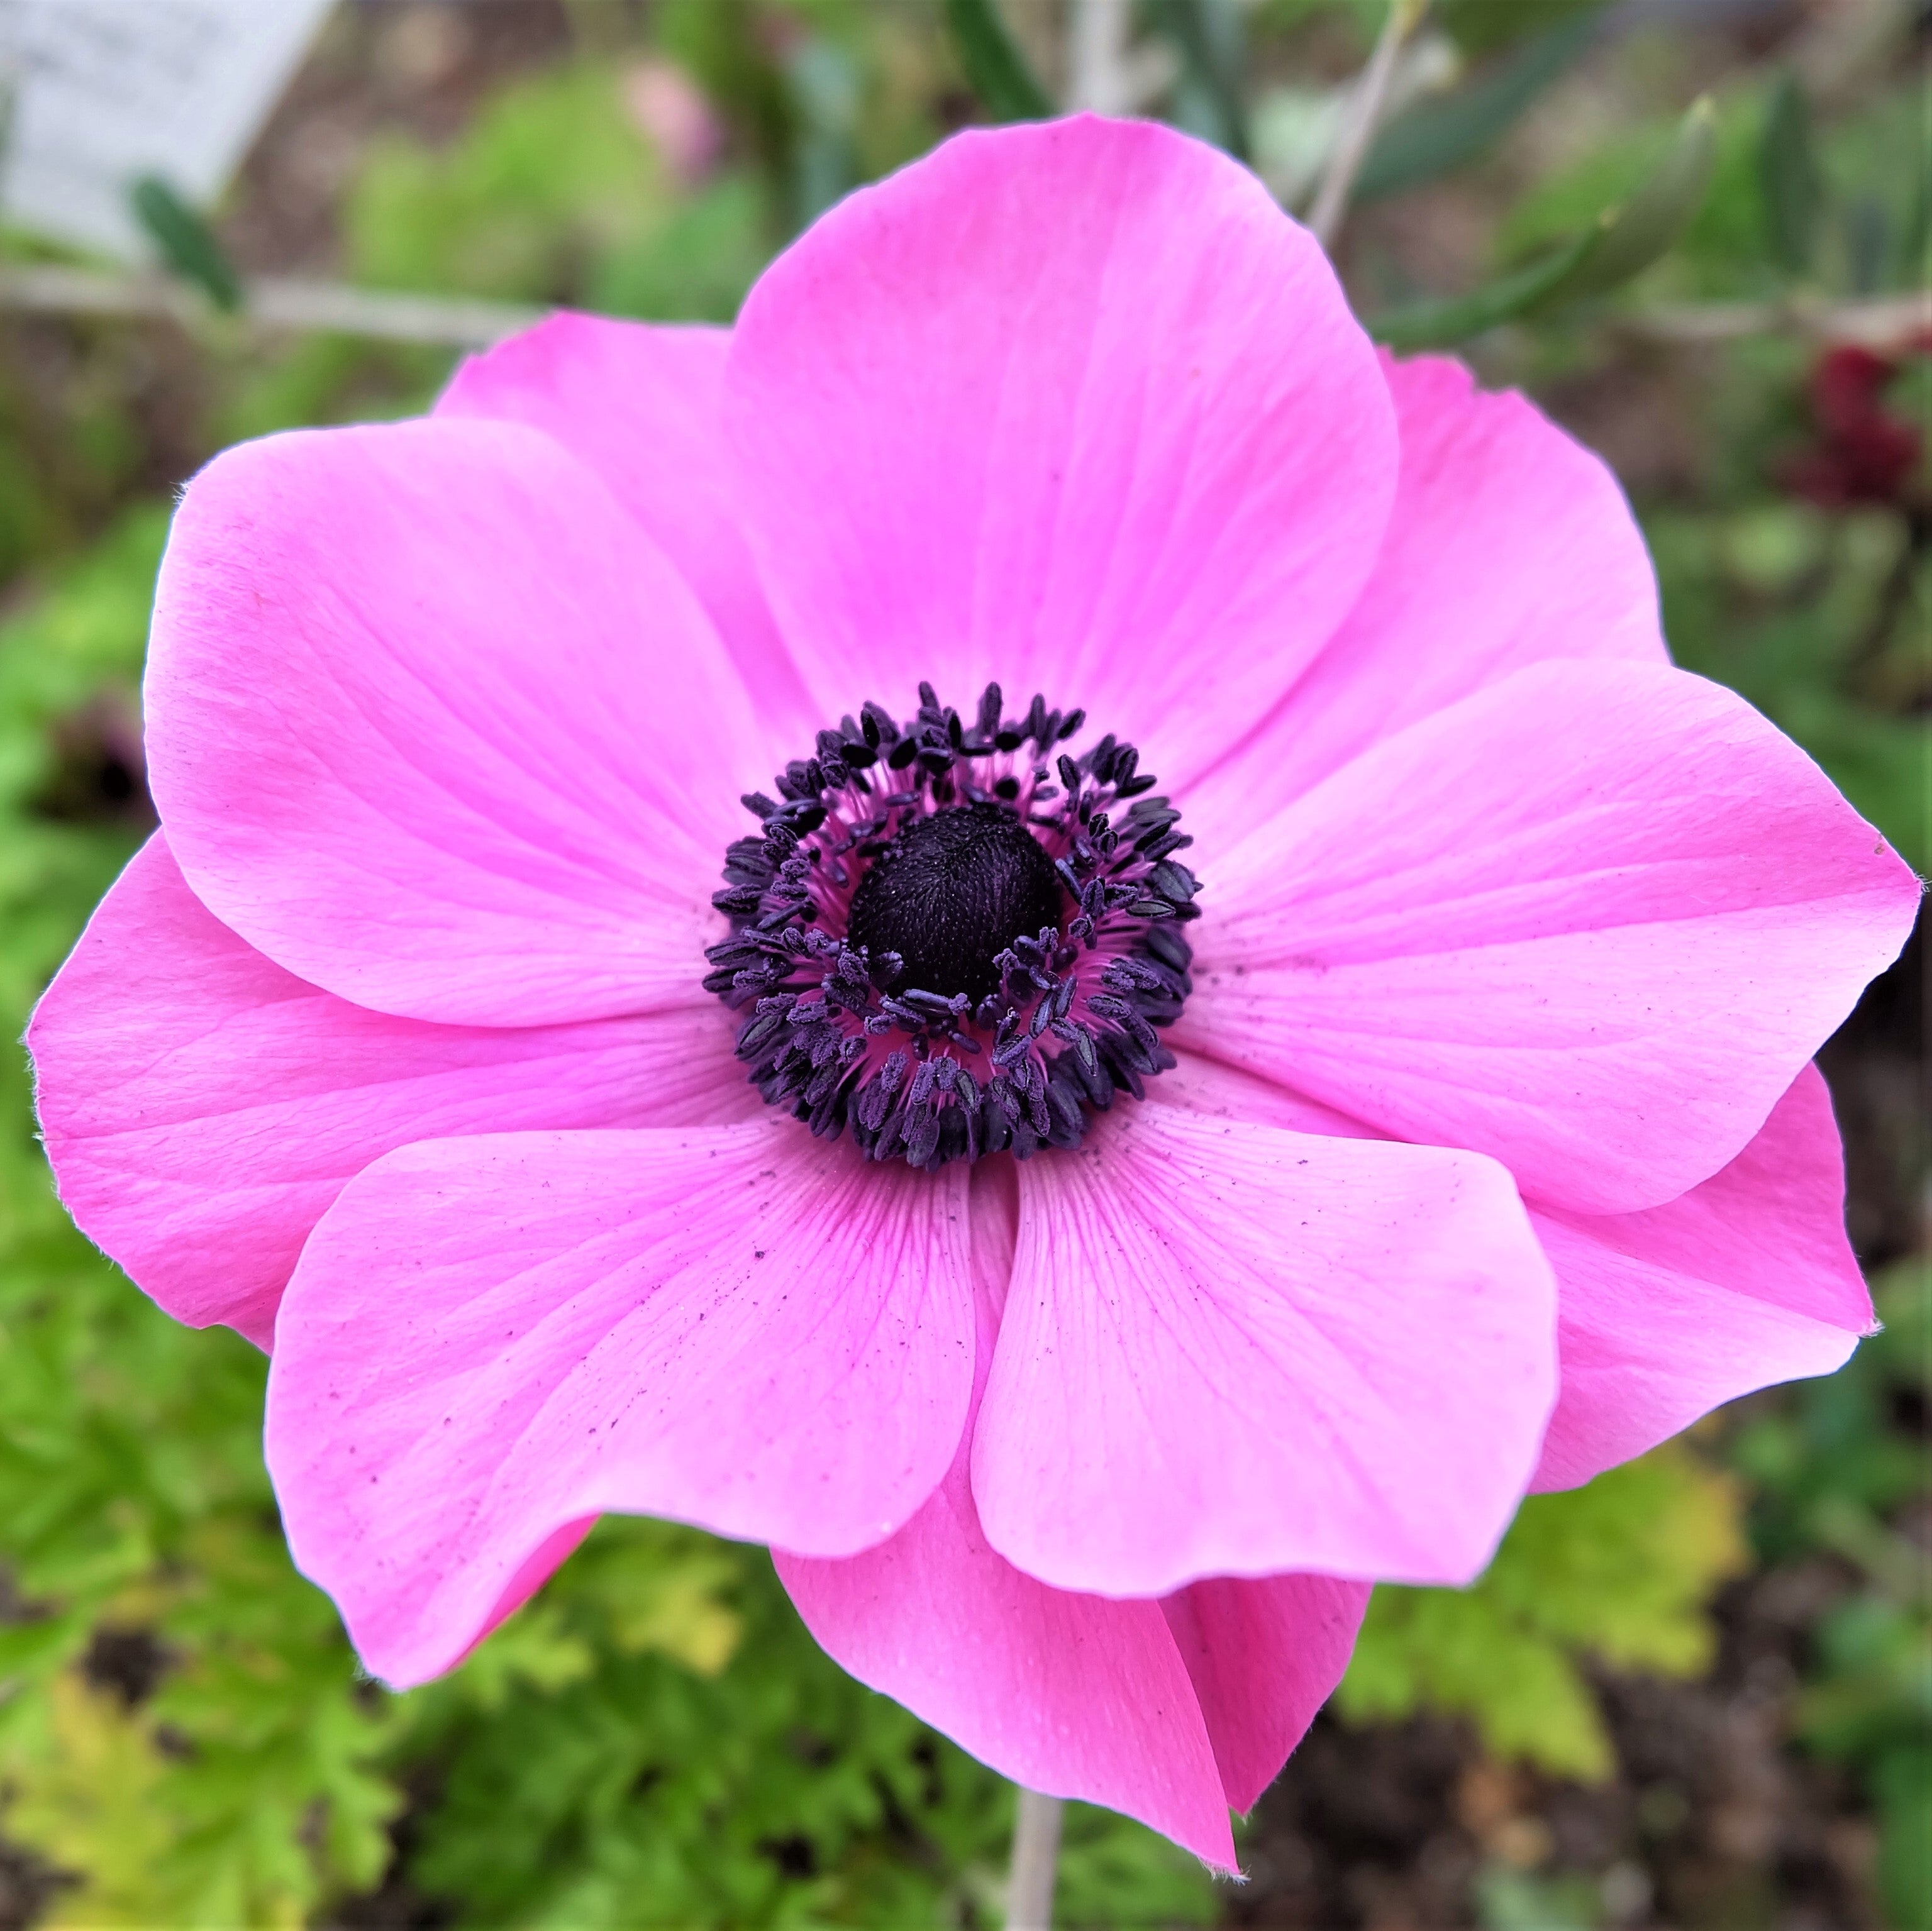 Anemone Bulbs Pink Anemone with Black Center – Easy To Grow Bulbs